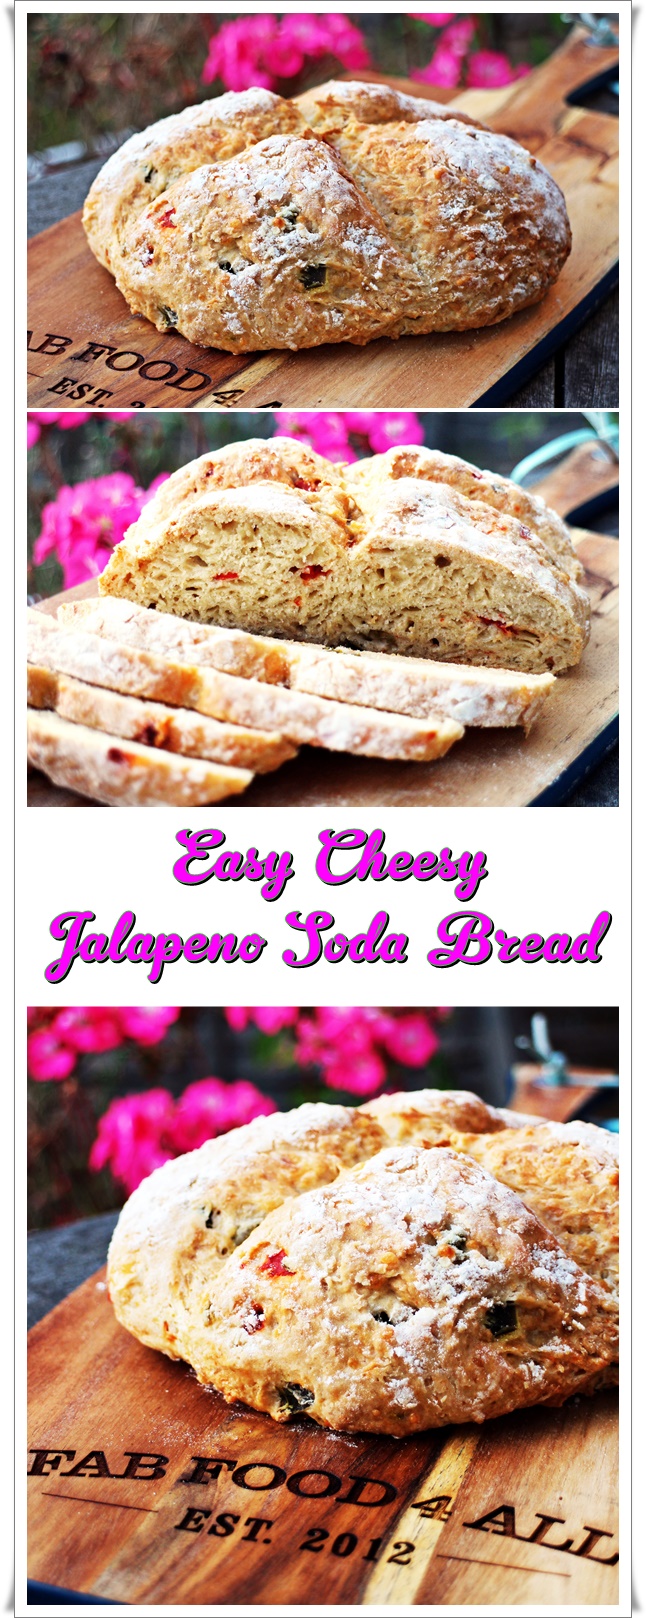 Easy Cheesy Jalapeno Soda Bread, delicious and perfect with soup! Fab Food 4 All